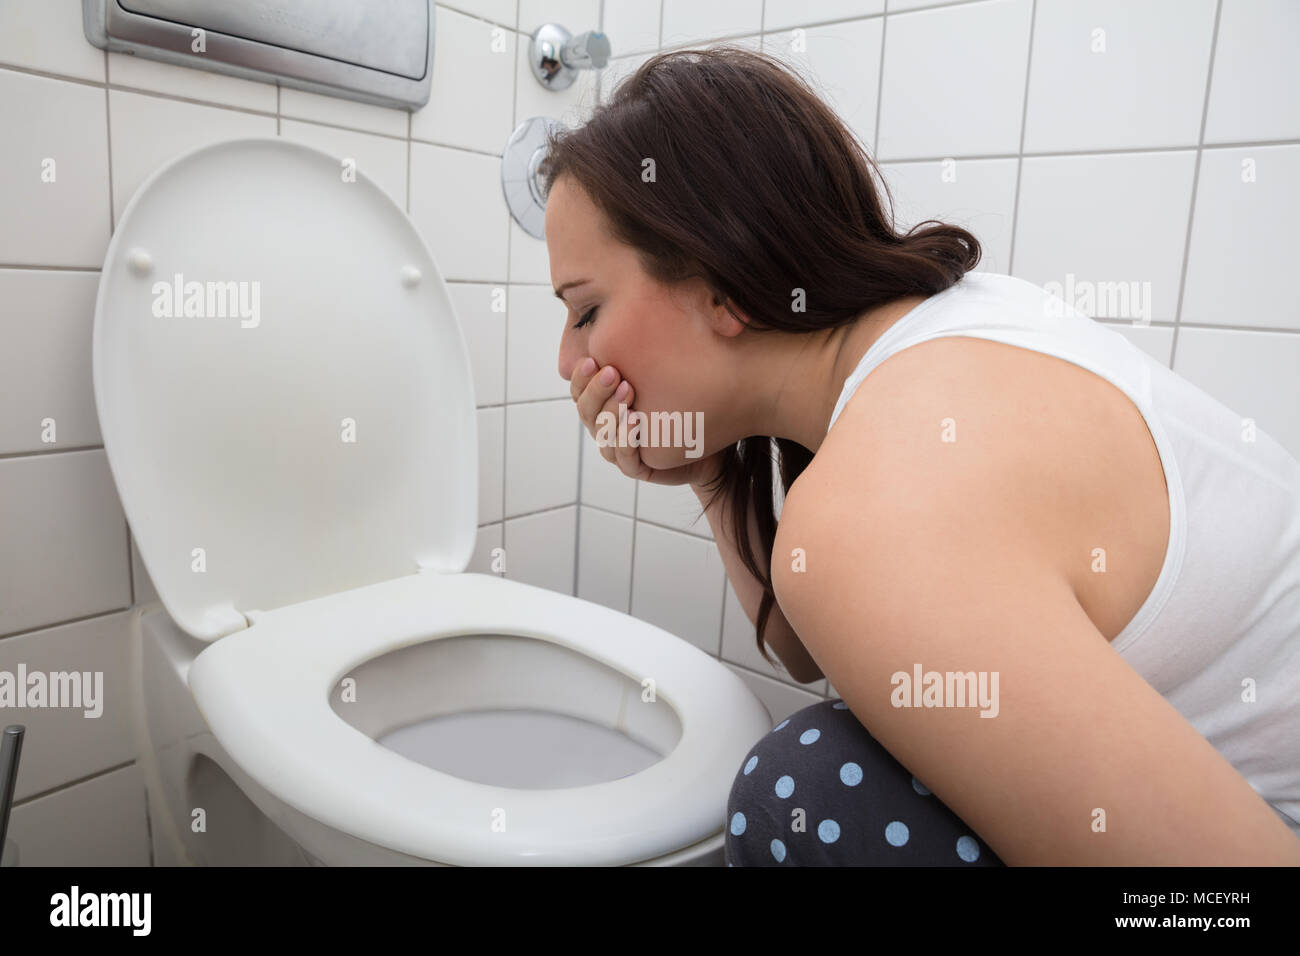 Close-up Of A Young Woman Vomiting In Toilet Bowl Stock Photo